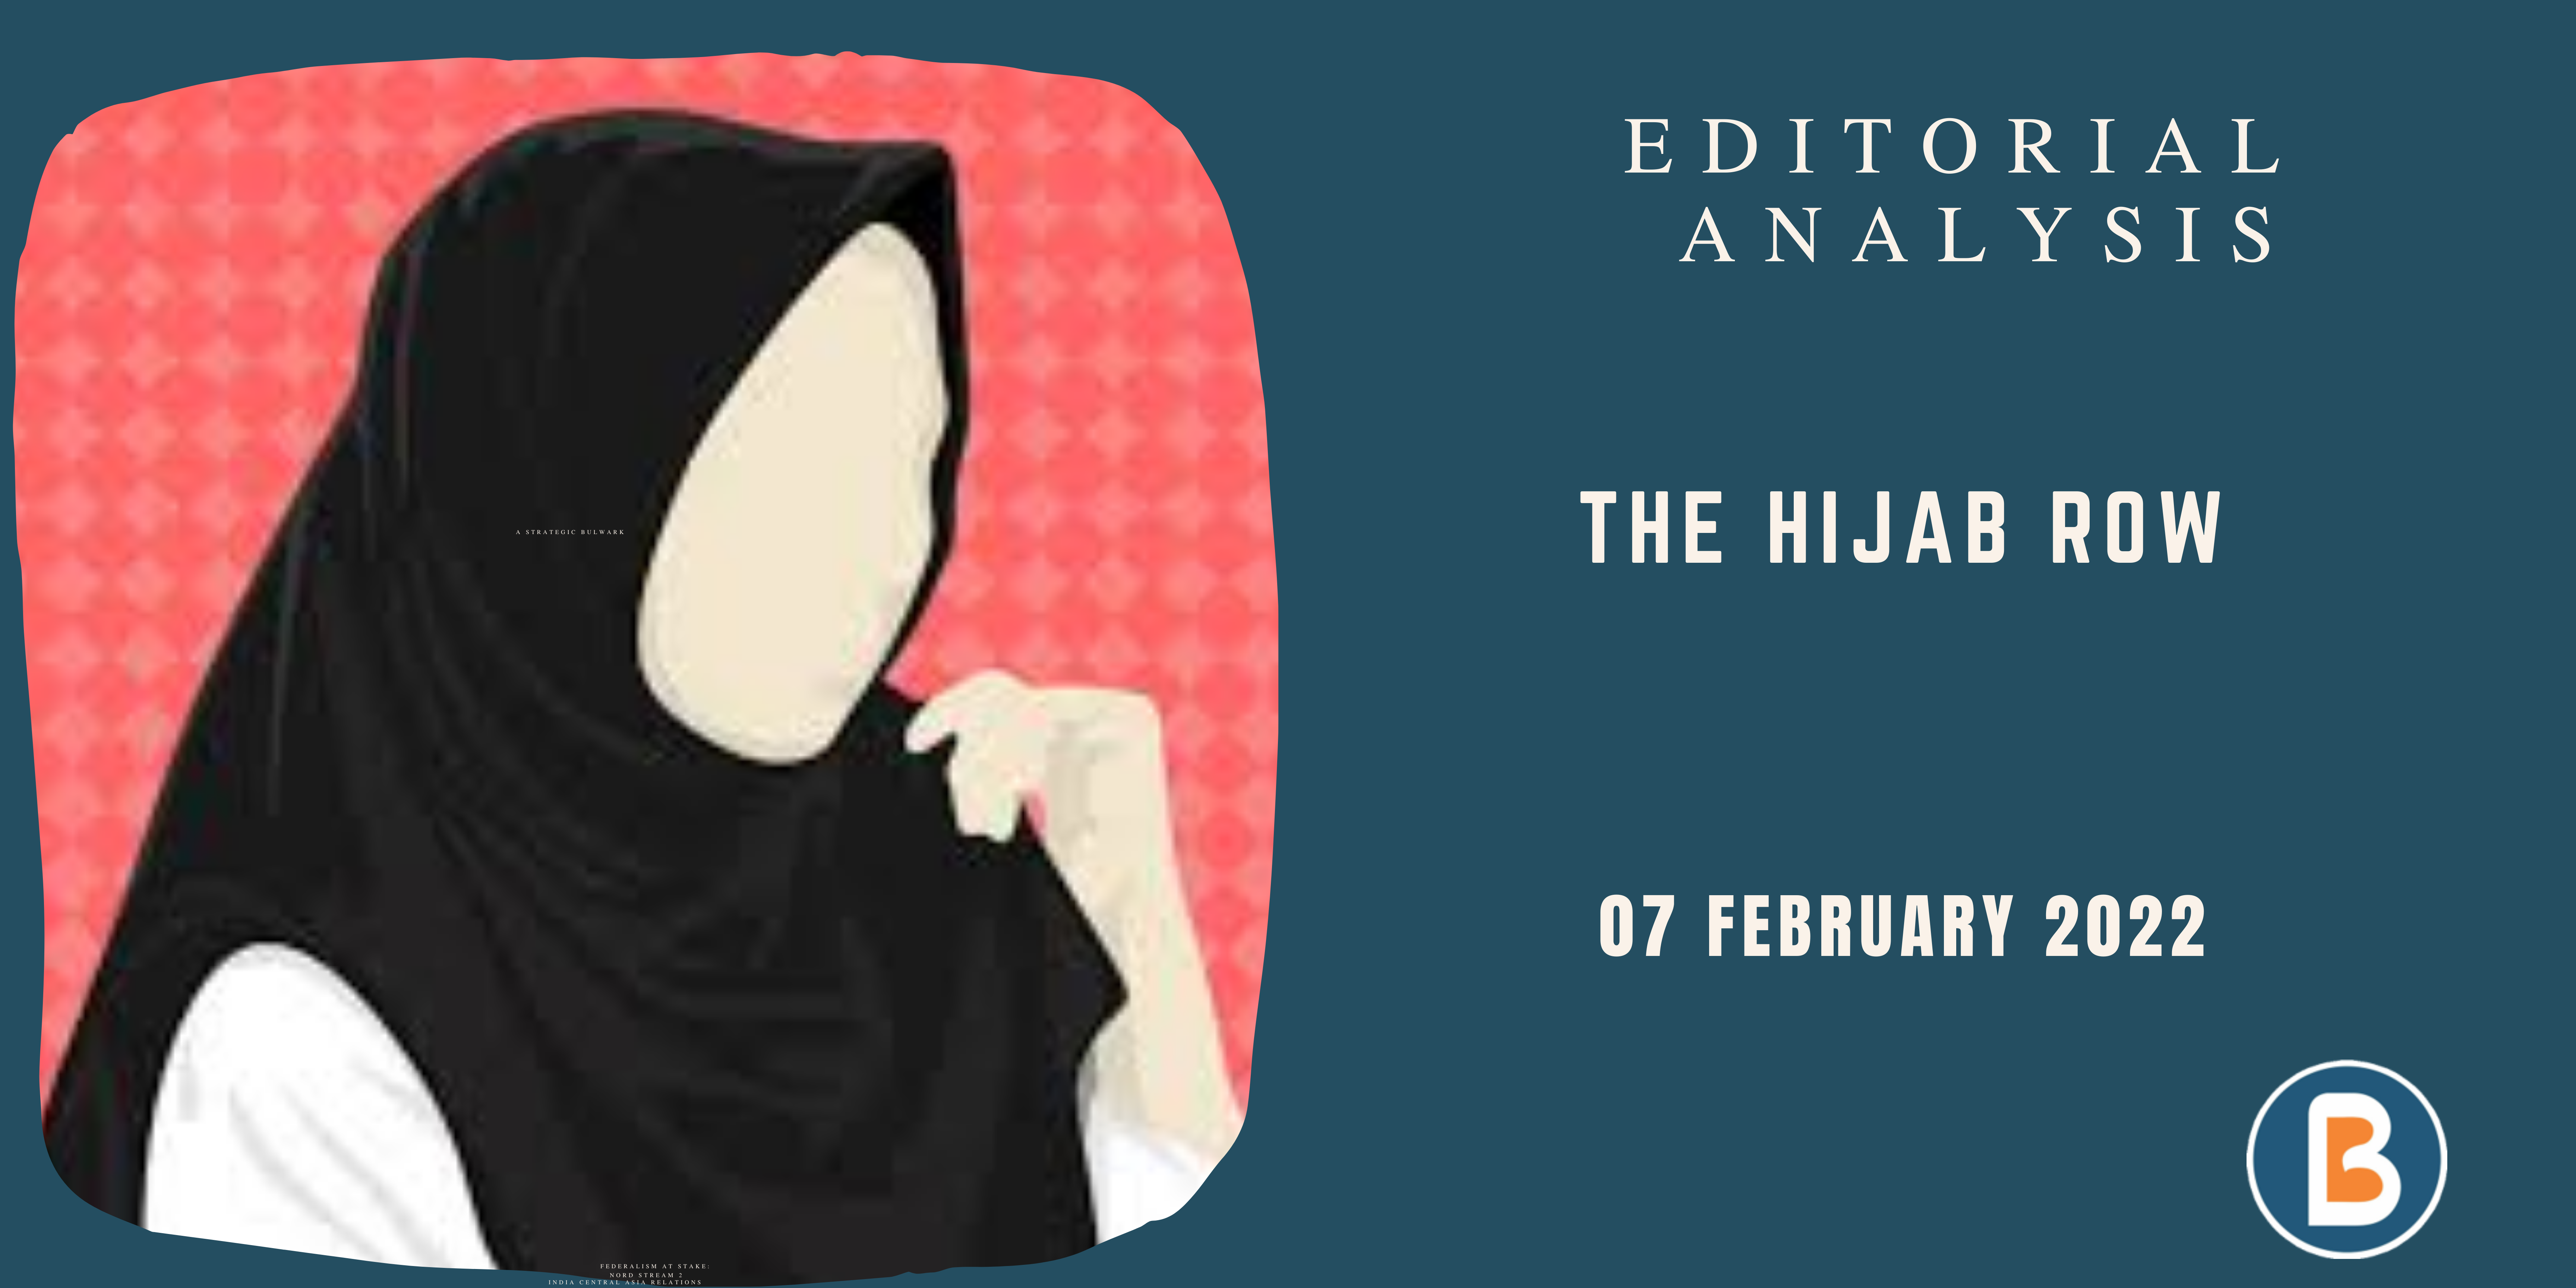 Editorial Analysis for UPSC - The Hijab Row